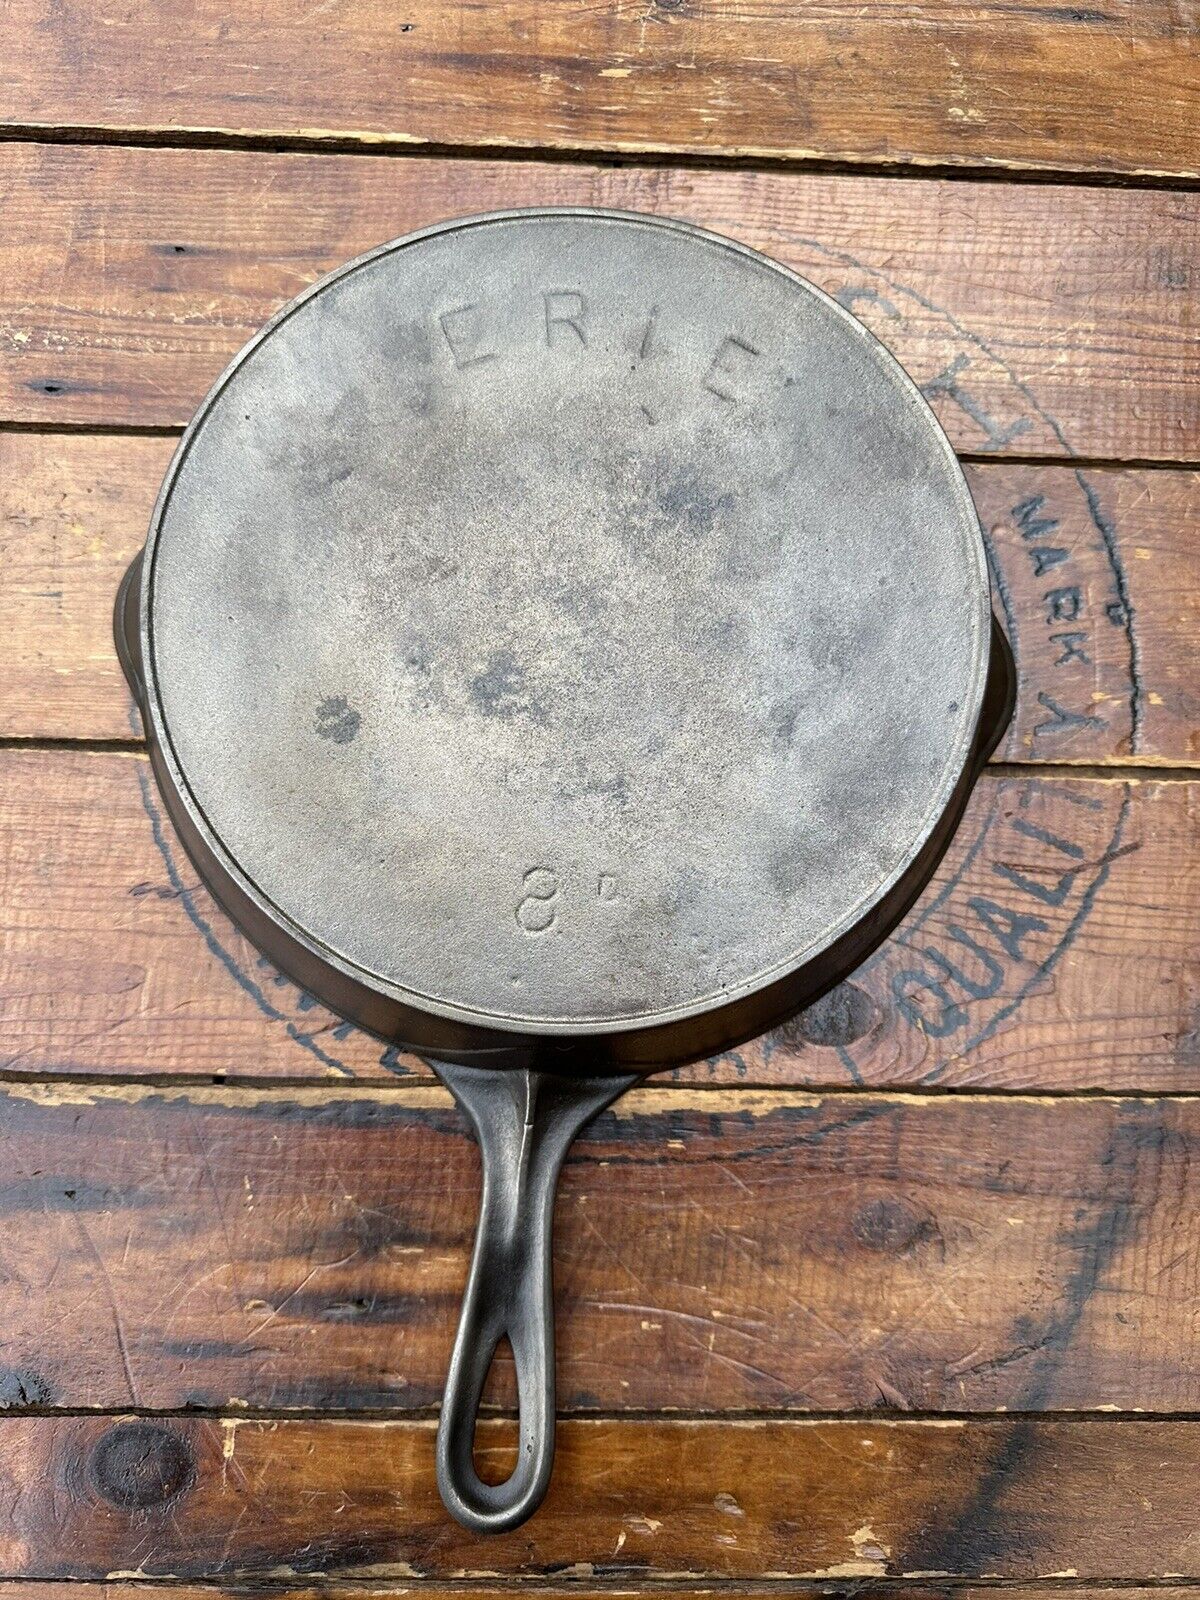 ERIE #8 CAST IRON SKILLET, PRE-GRISWOLD, 2ND SERIES, FLOWER MARK, CIRCA 1880s